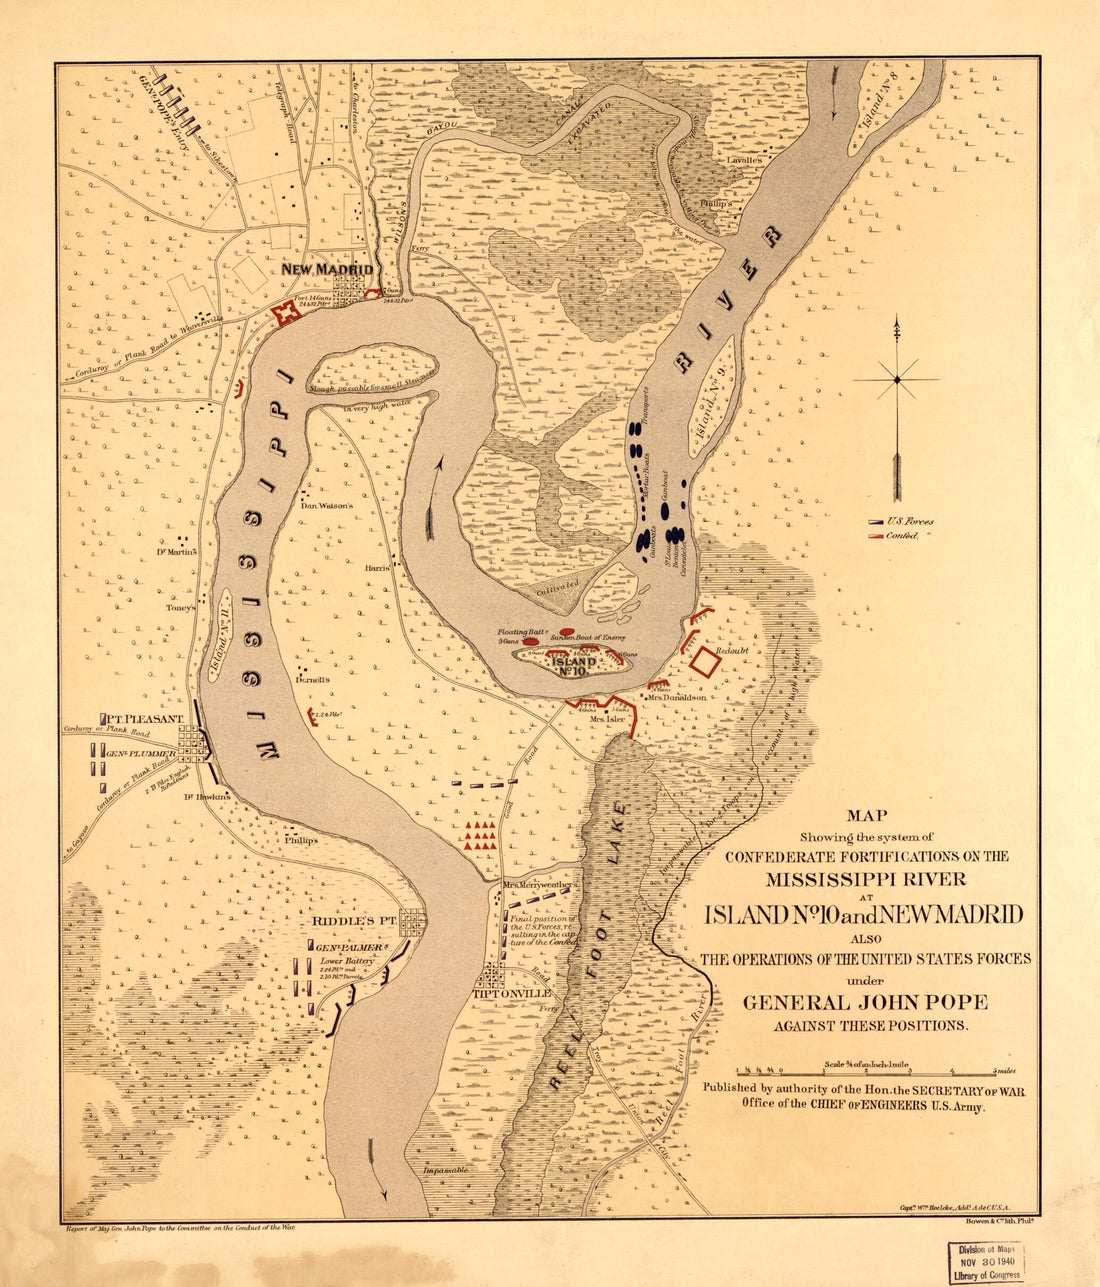 This old map of Map Showing the System of Confederate Fortifications On the Mississippi River at Island No. 10 and New Madrid, Also the Operations of the United States Forces Under General John Pope, Against These Positions from 1862 was created by Wm Ho